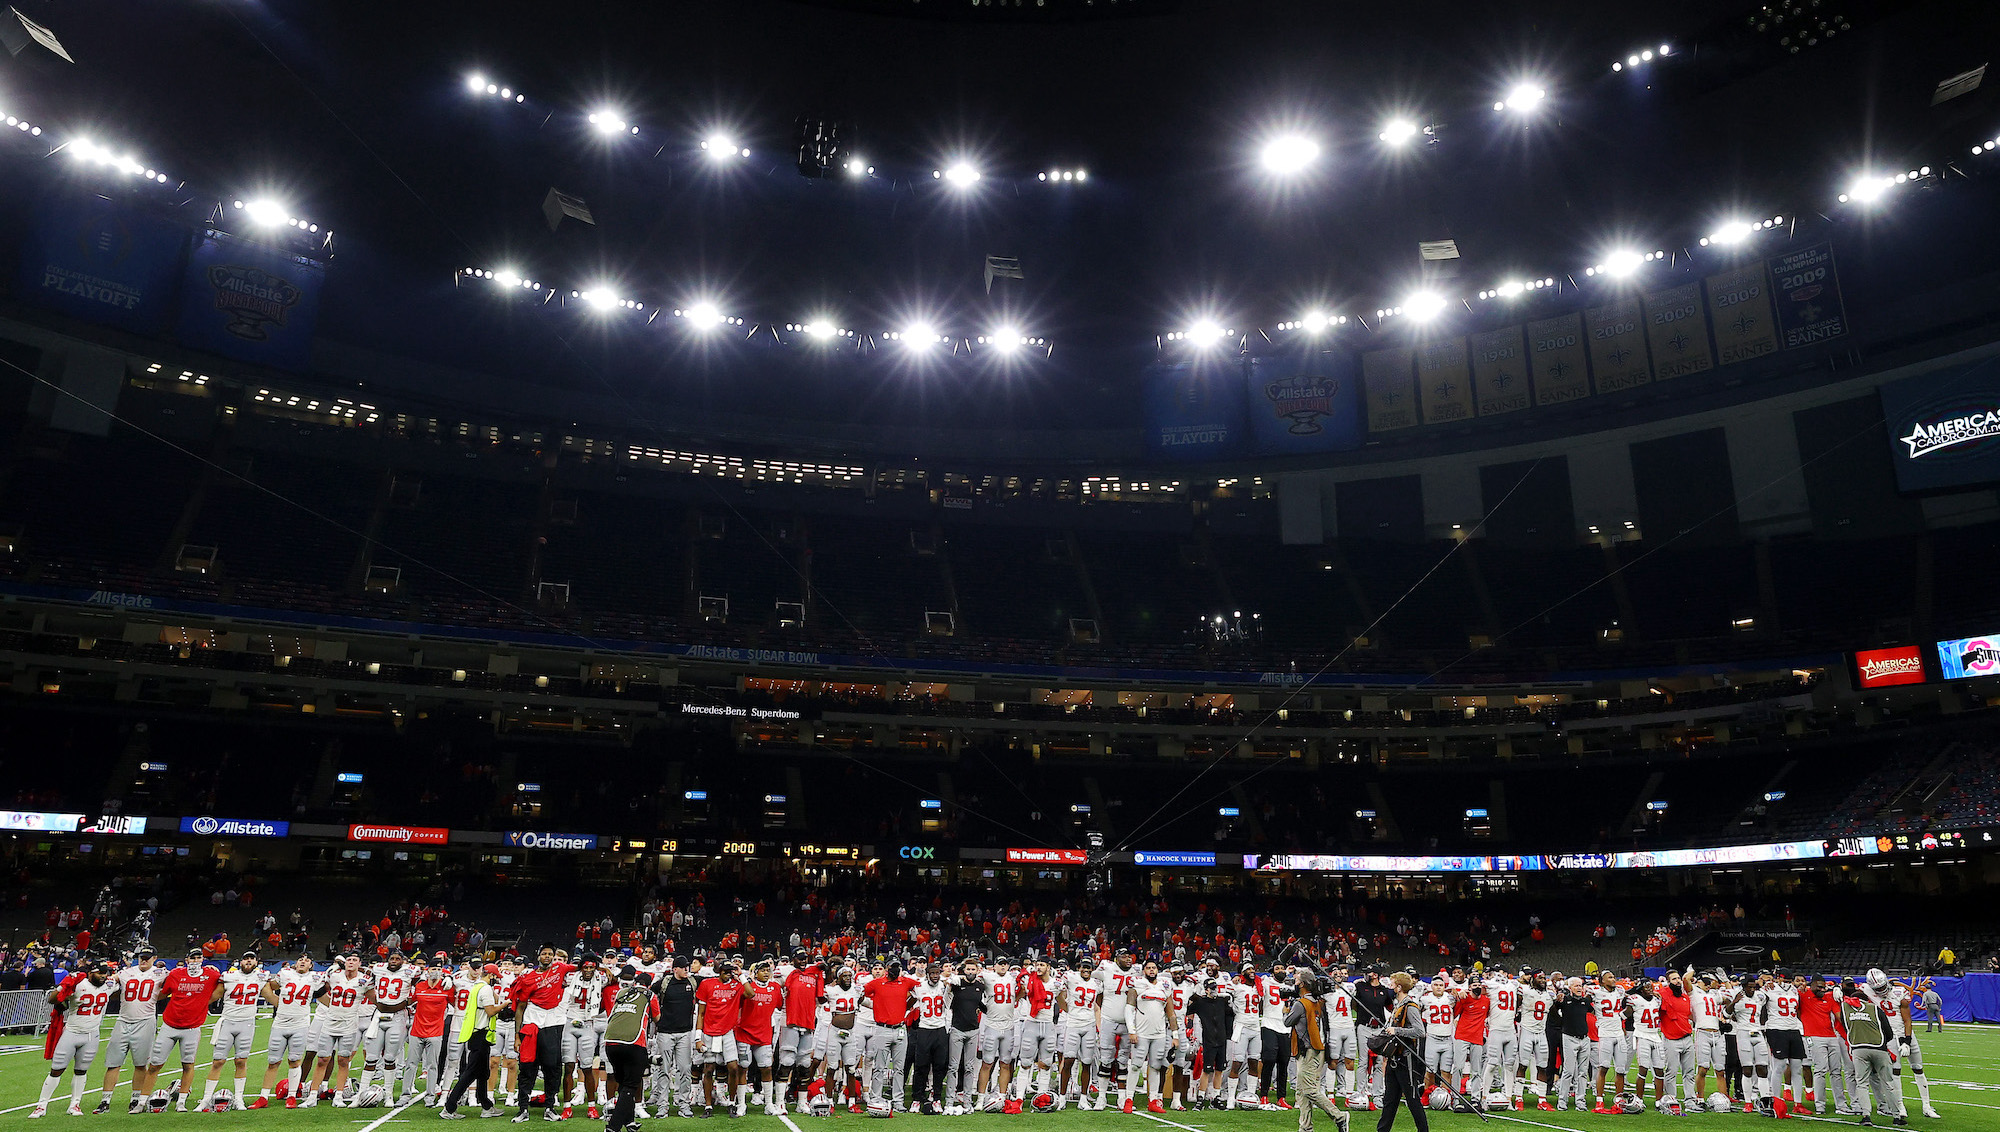 NEW ORLEANS, LOUISIANA - JANUARY 01: The Ohio State Buckeyes celebrate after defeating the Clemson Tigers 49-28 during the College Football Playoff semifinal game at the Allstate Sugar Bowl at Mercedes-Benz Superdome on January 01, 2021 in New Orleans, Louisiana. (Photo by Kevin C. Cox/Getty Images)